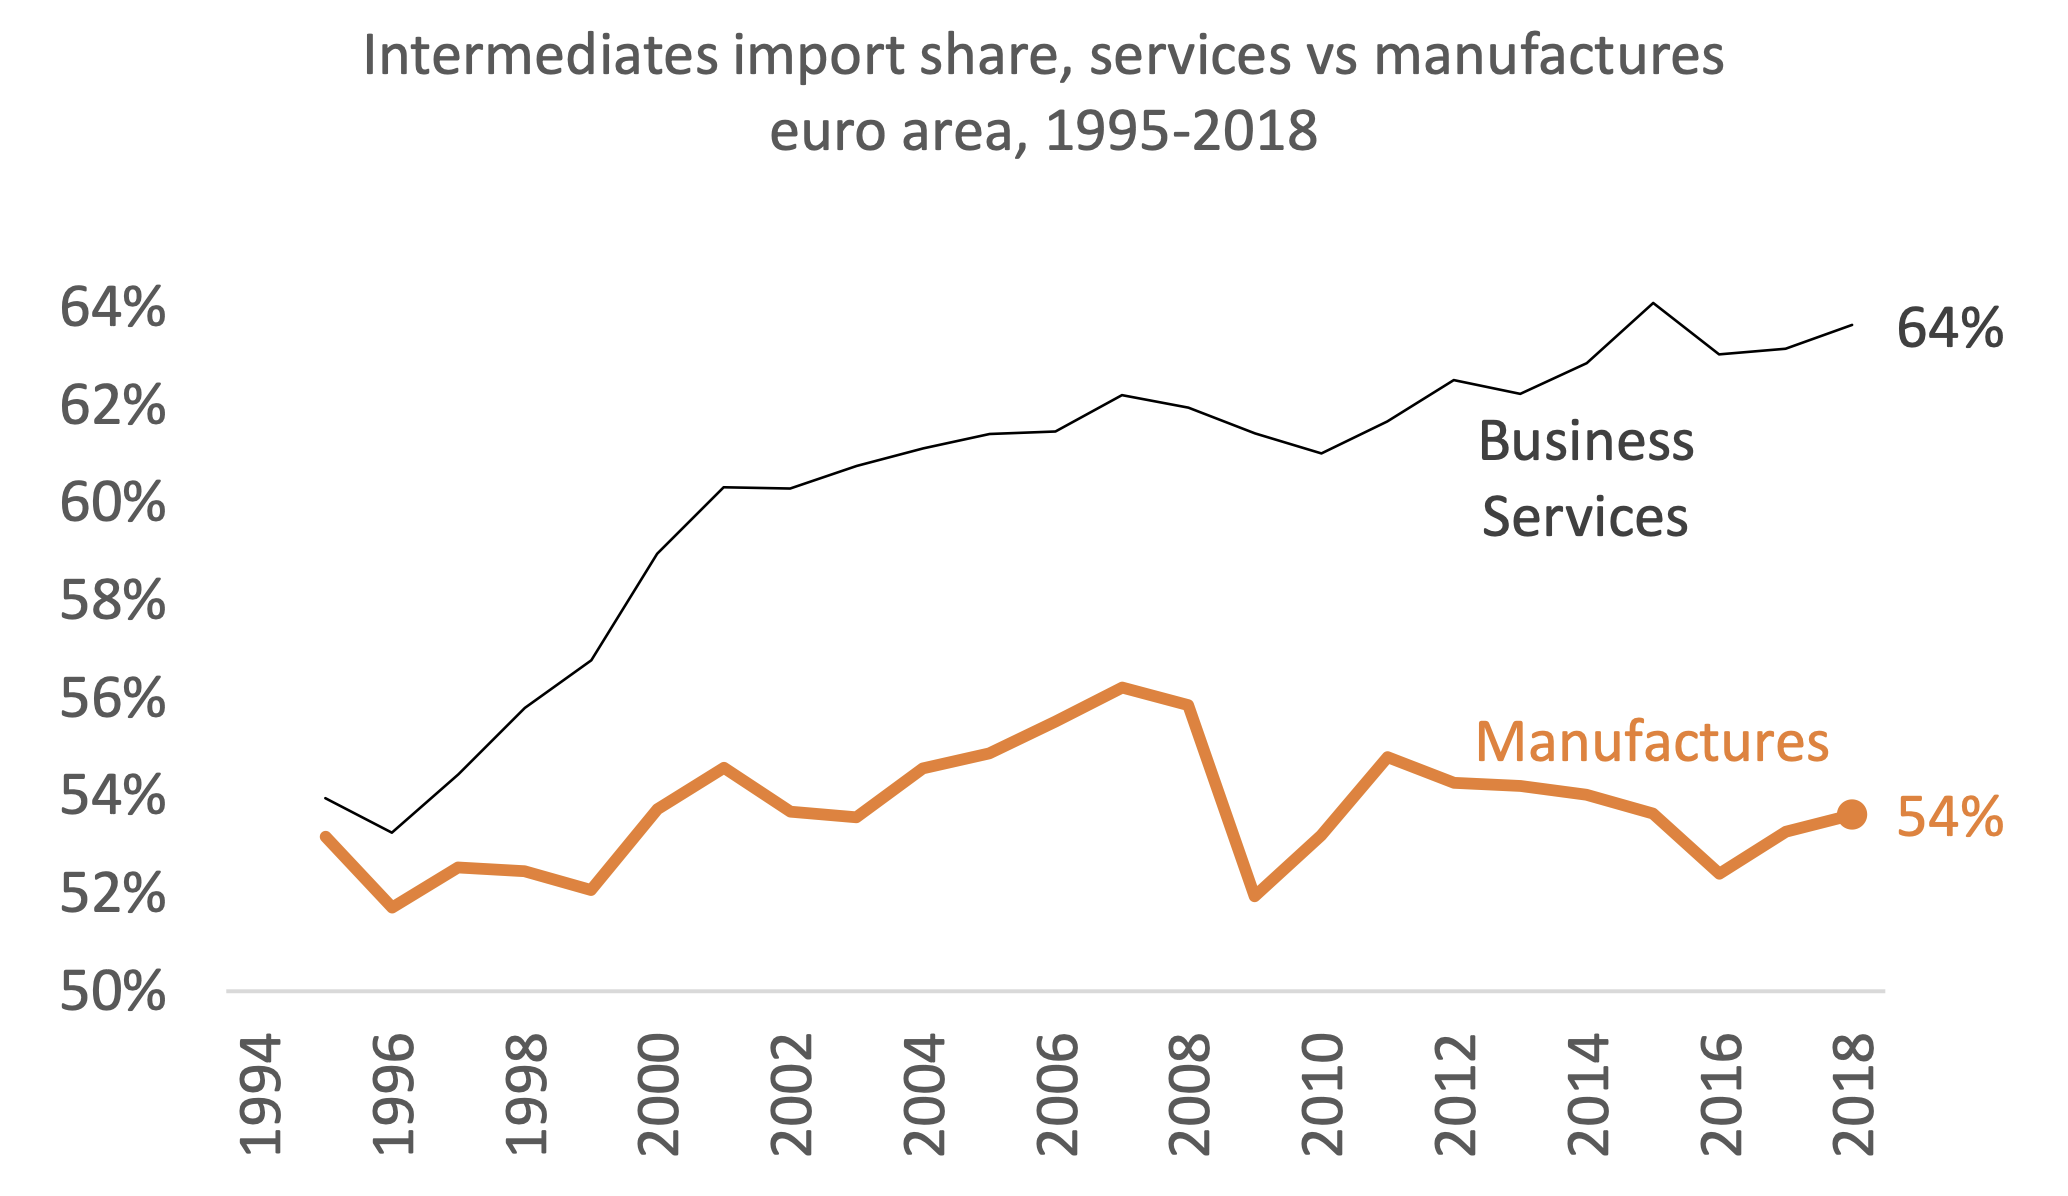 Figure A4 Intermediates as share of imported services and manufactures, 1995-2018, euro area 19 and UK (shares of own-sector imports, 1995-2018)